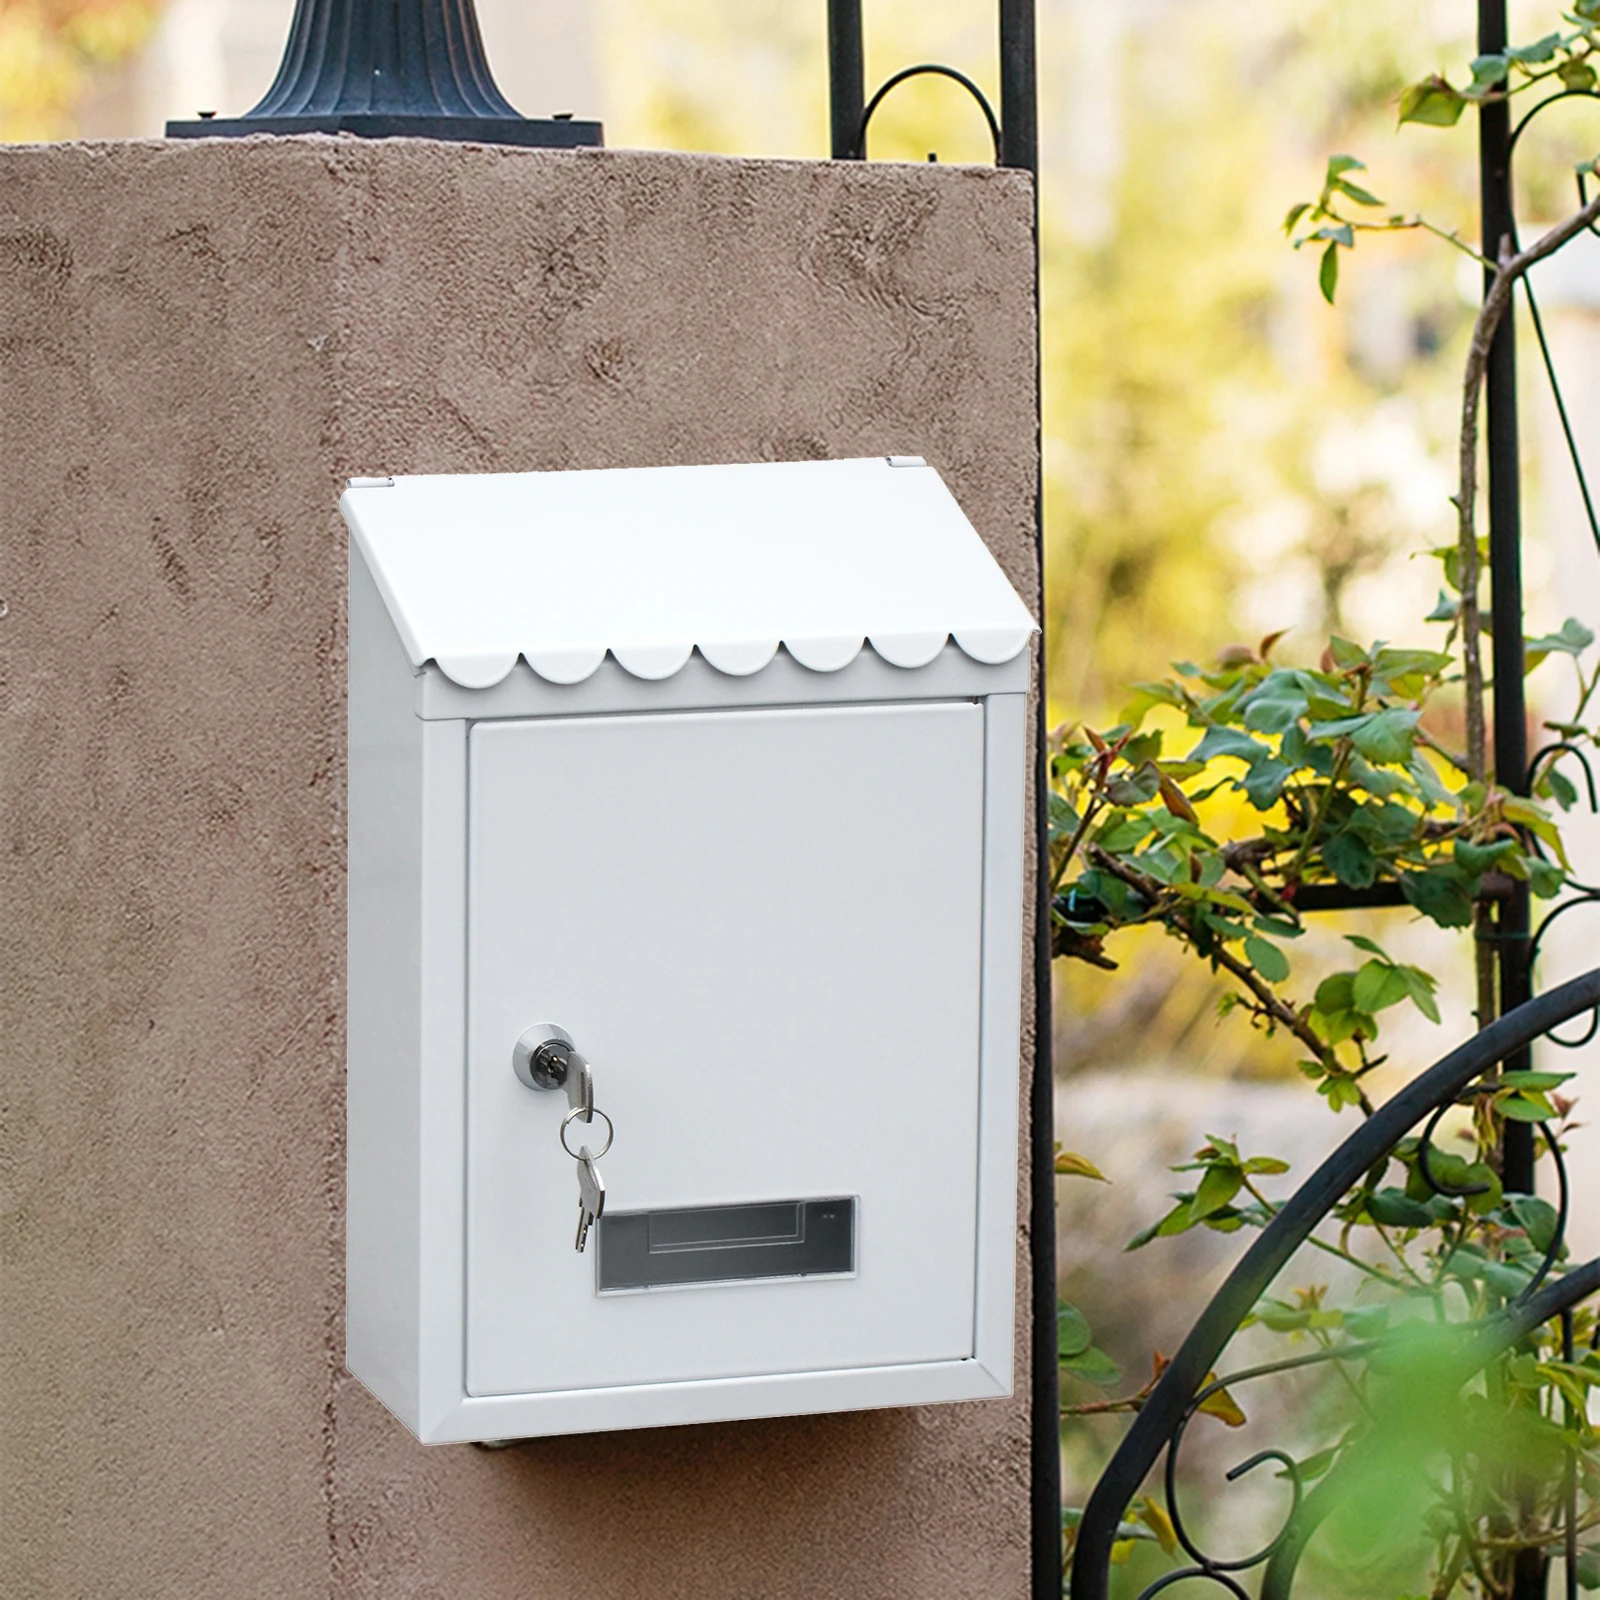 Locking Mailbox Wall Mount Letterbox Outdoor Rainproof Parcel Boxes &2 Keys 